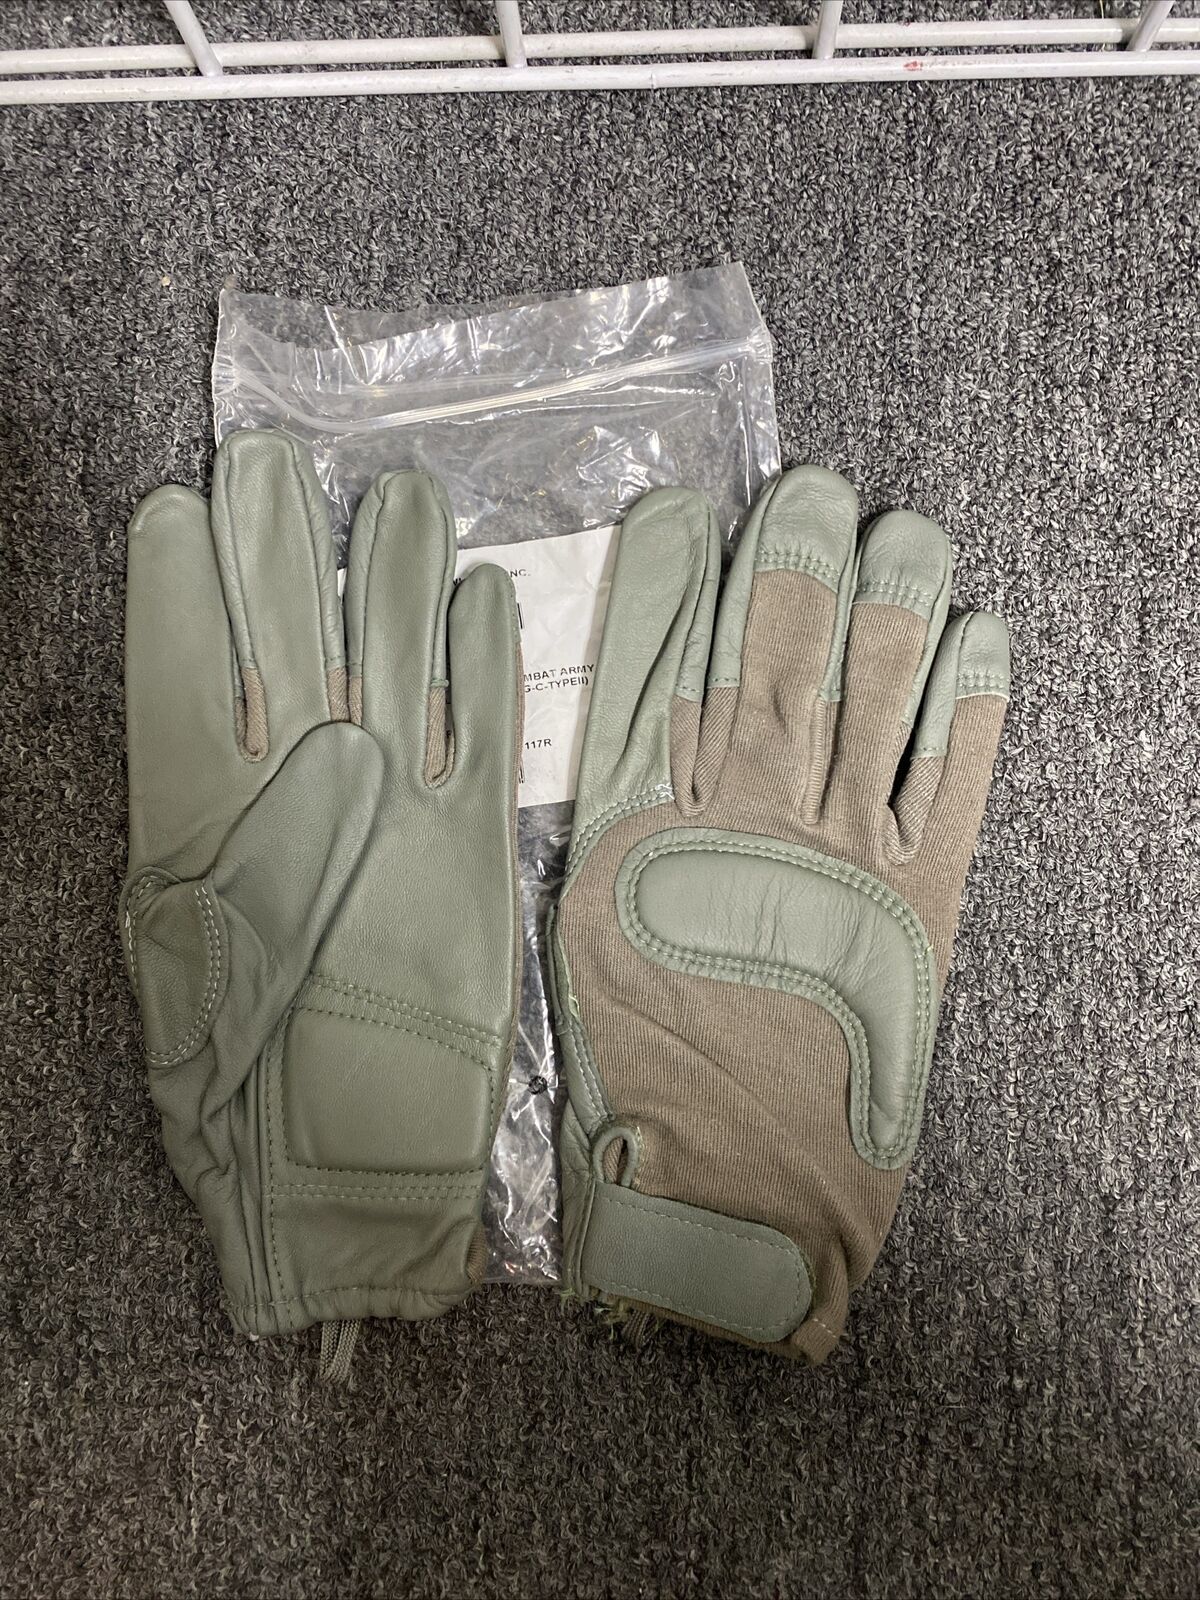 US Army Combat Gloves Foliage Green Size MEDIUM New In Package